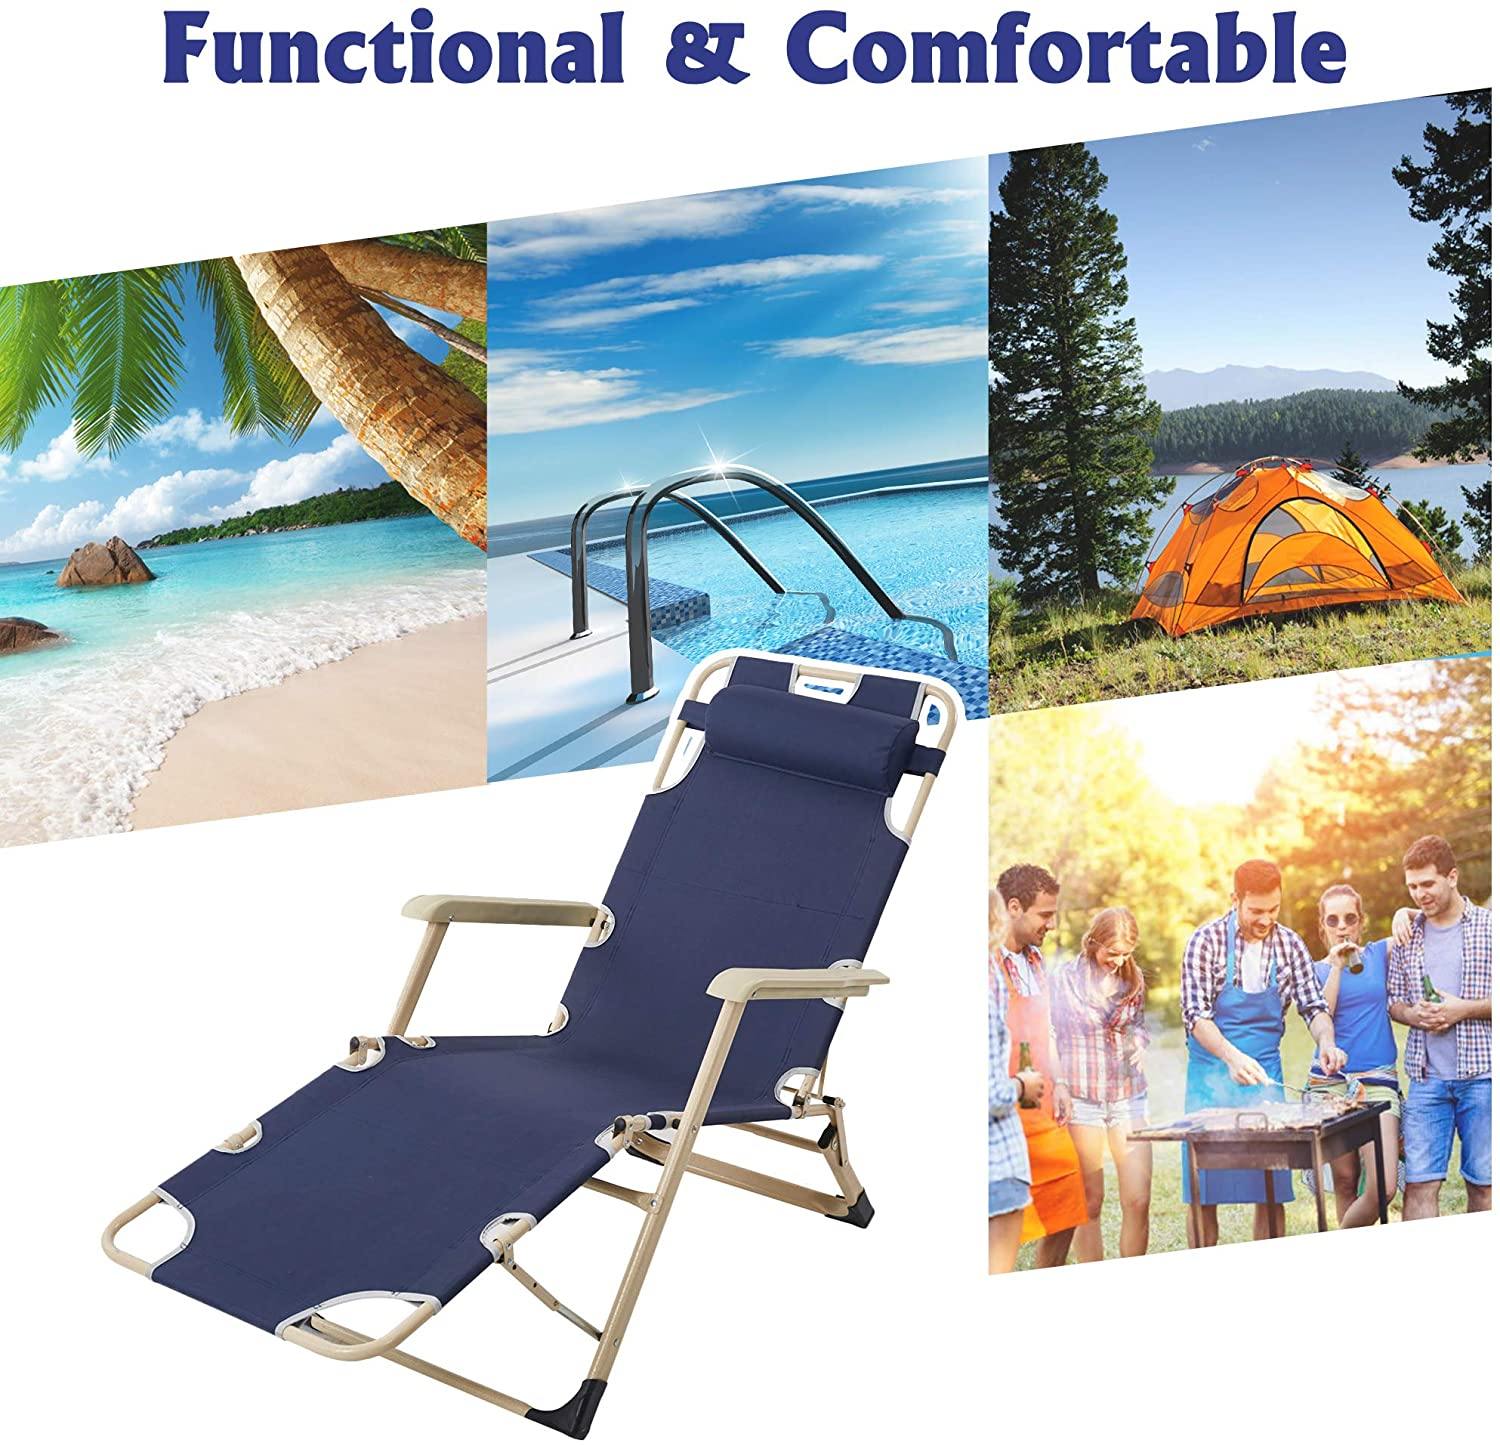 Set of 2 Heavy Duty Lounge Chairs and Full Flat Cot 2 Positions, Folding Reclining Chairs for Outdoor Beach Pool Camping, Blue, 70"L X 20.5"W - Bosonshop